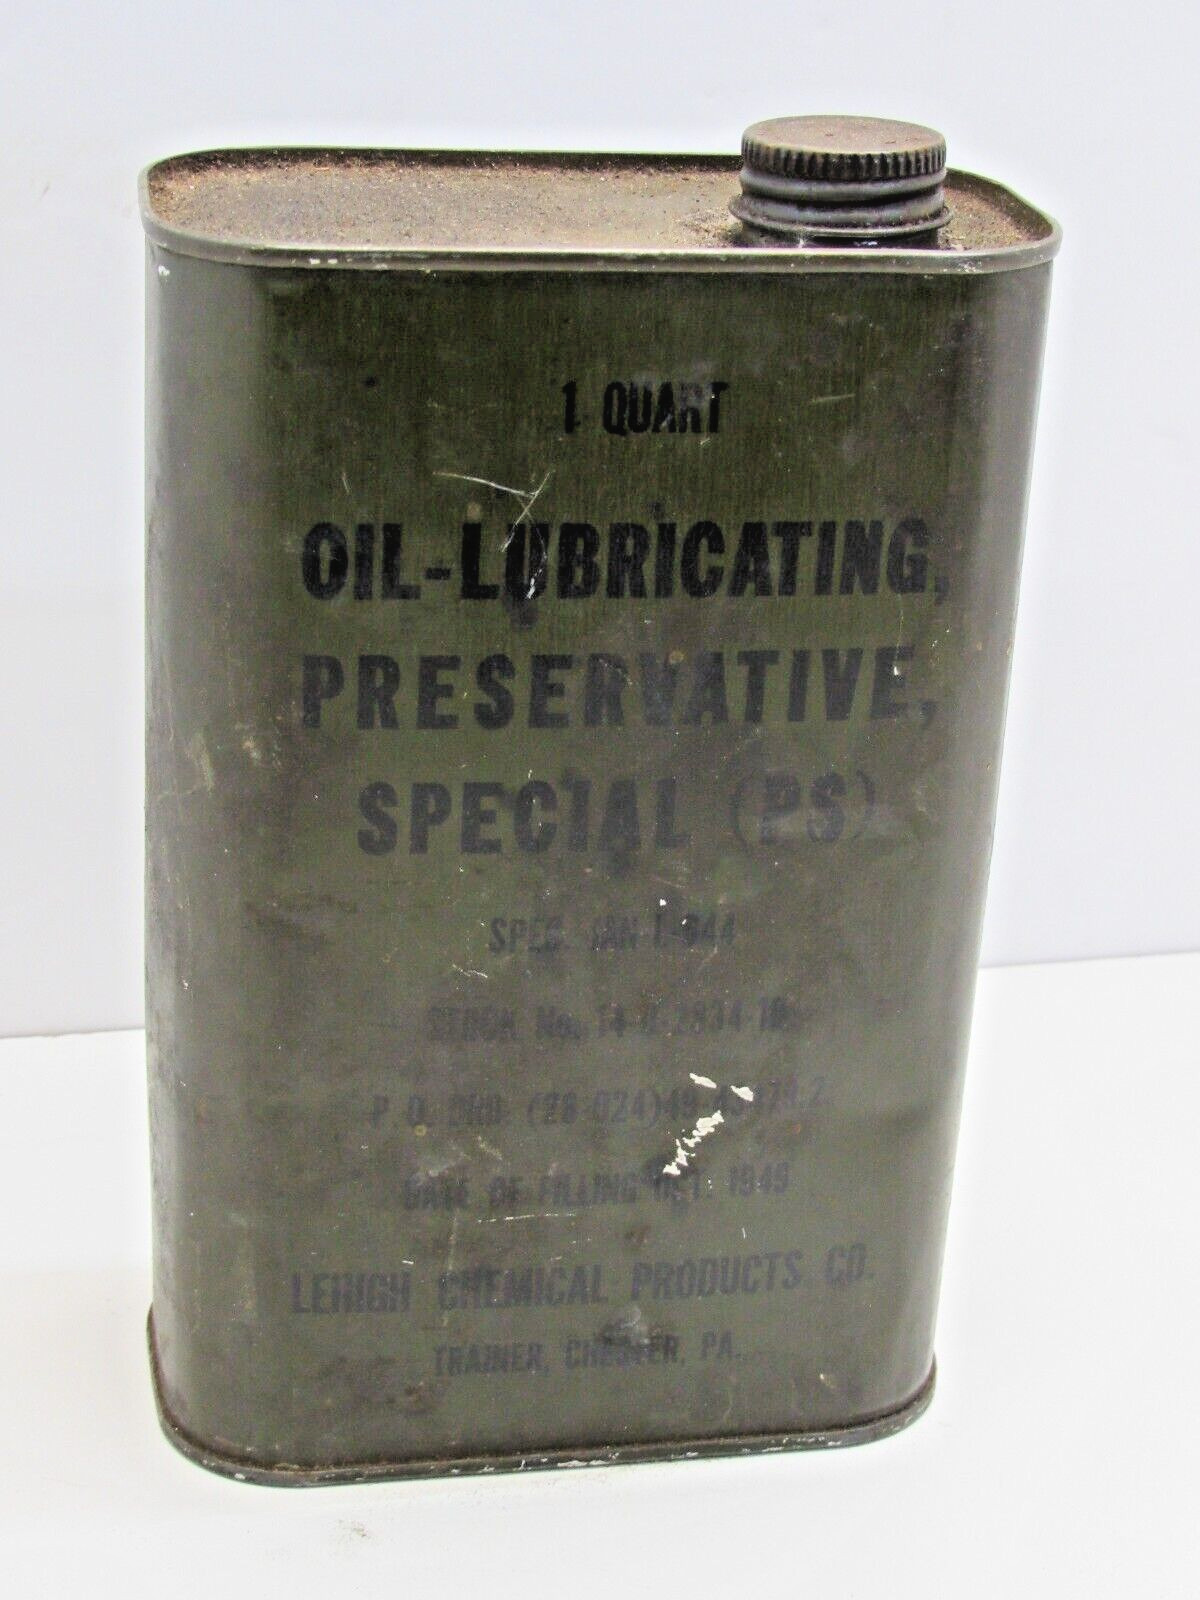 Vintage Military  Lubricating Preservative Special (PS) 1 Quart 14-0-2934-10 #H2